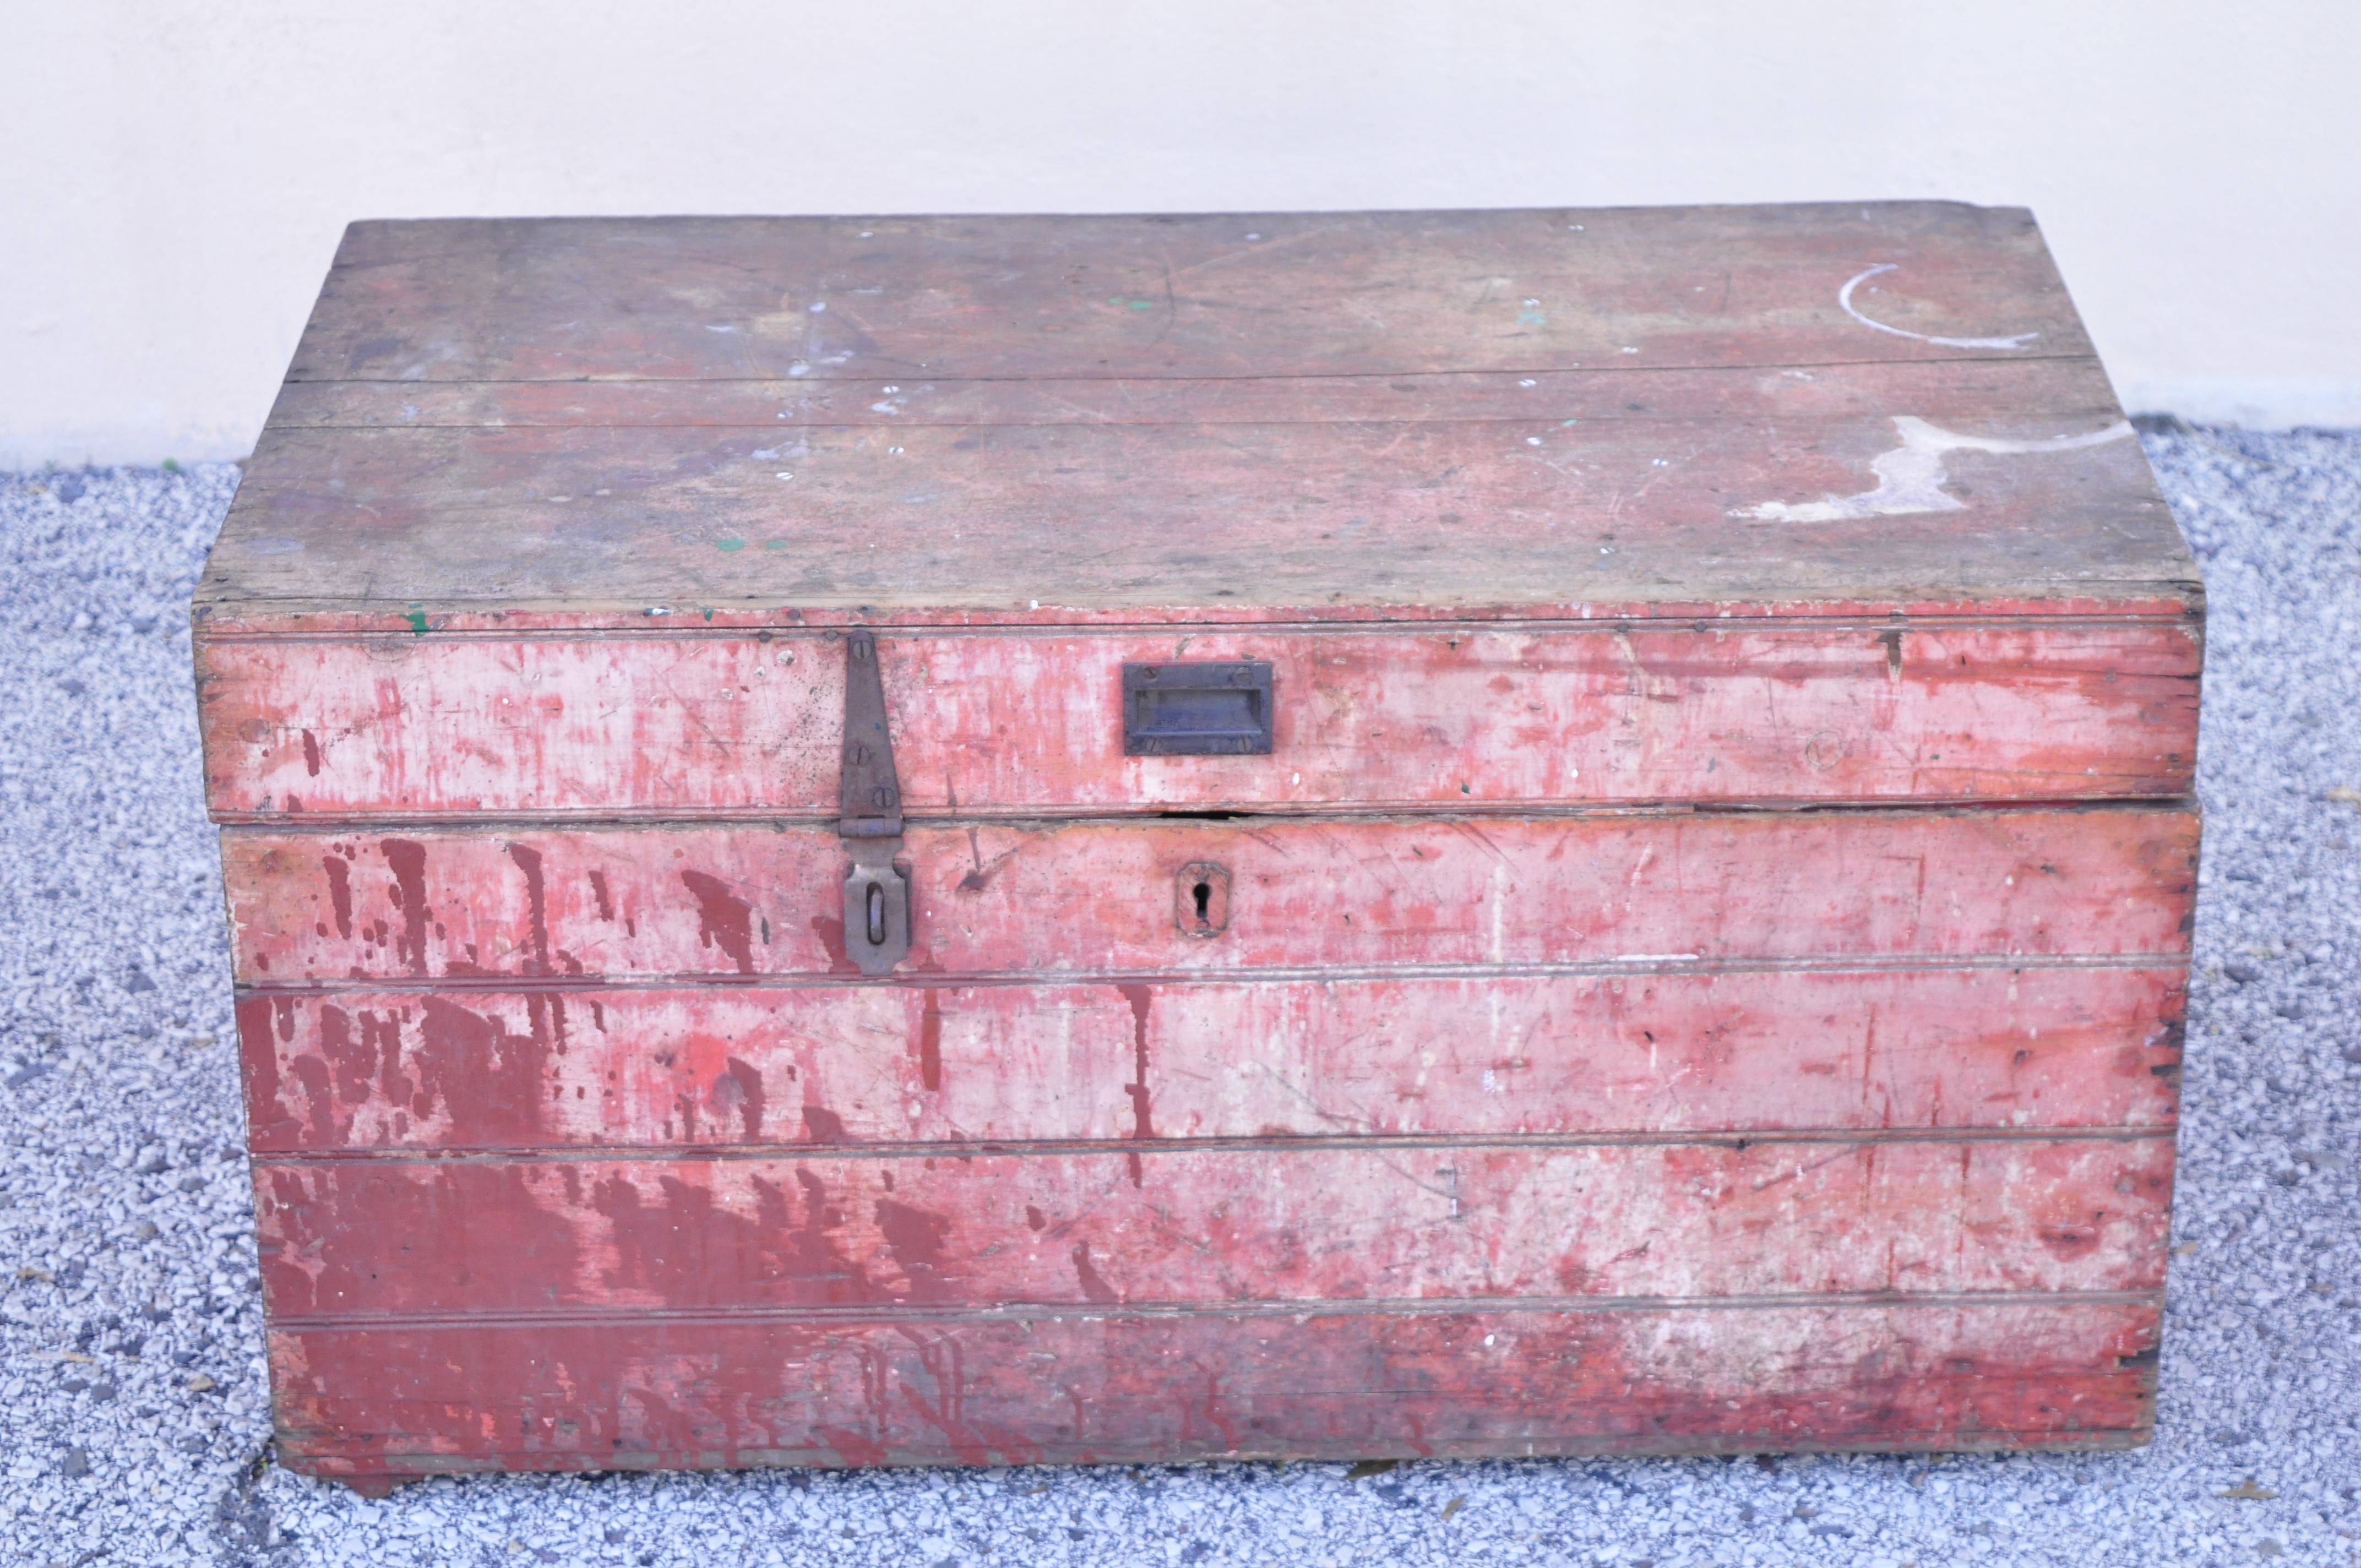 Antique wood country red distress painted trunk treasure blanket chest. Item features red distressed/weathered painted finish, cast iron hardware, wood construction, no key, but unlocked, very nice antique item, quality American craftsmanship. Circa